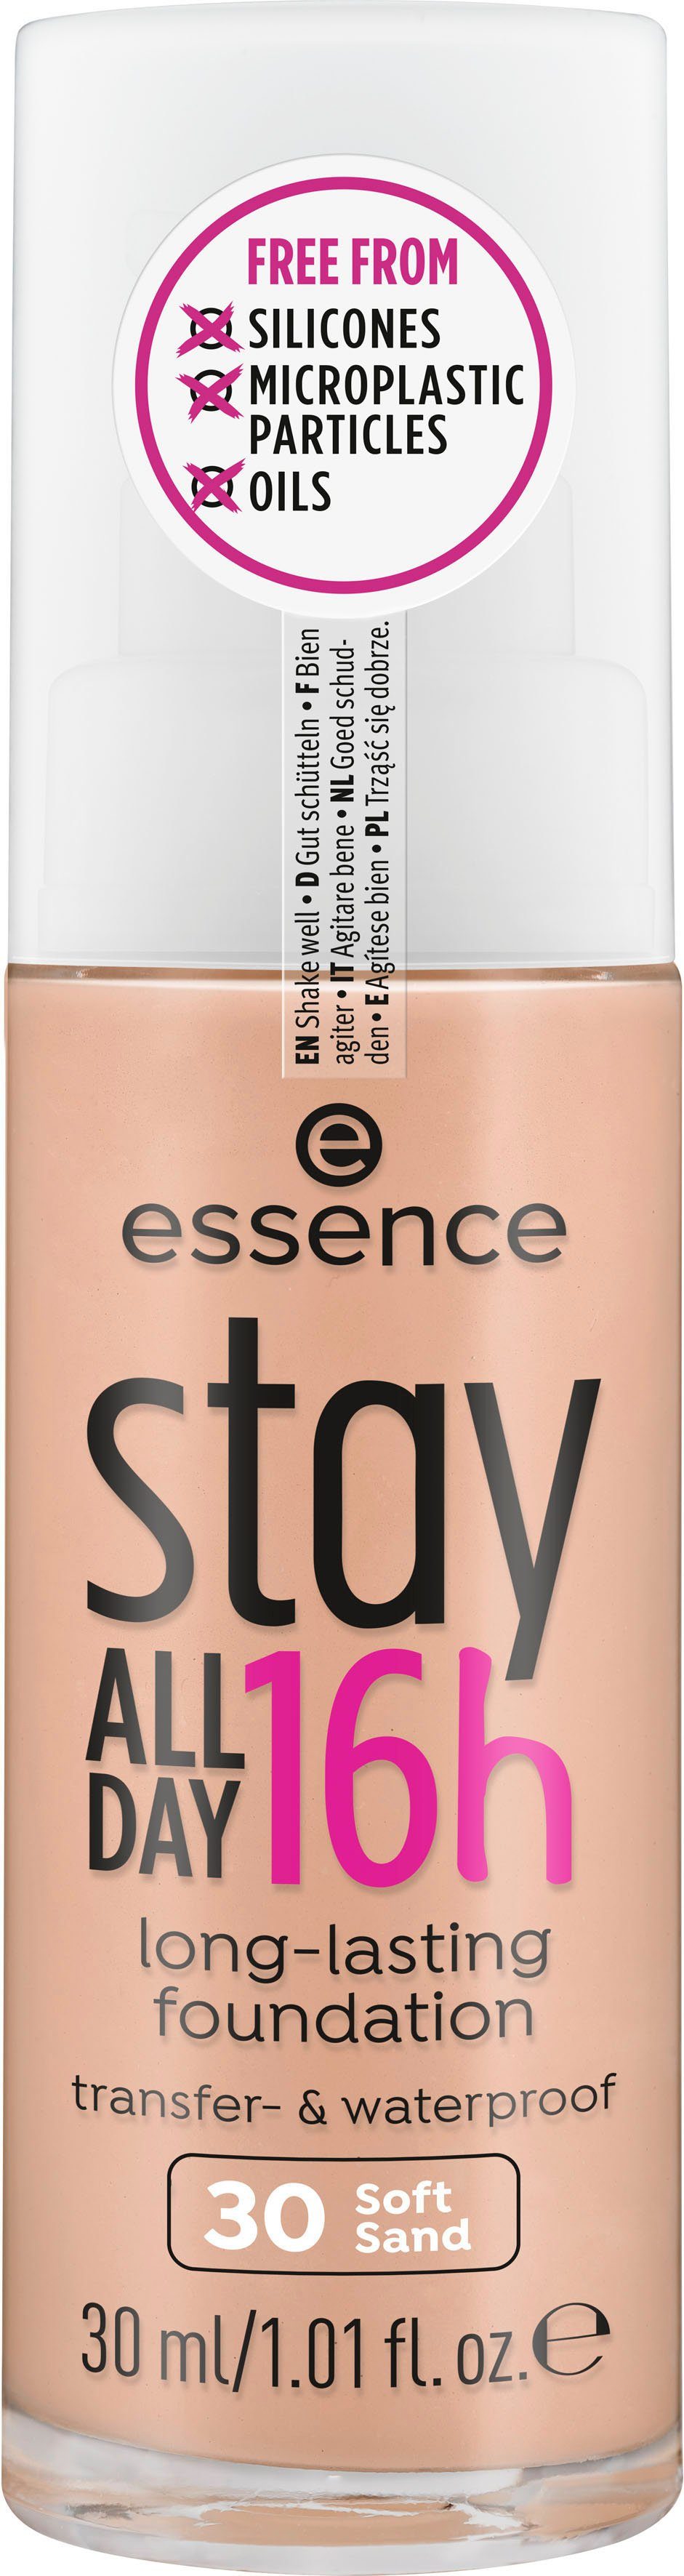 16h DAY stay Foundation Soft Sand Essence ALL long-lasting, 3-tlg.